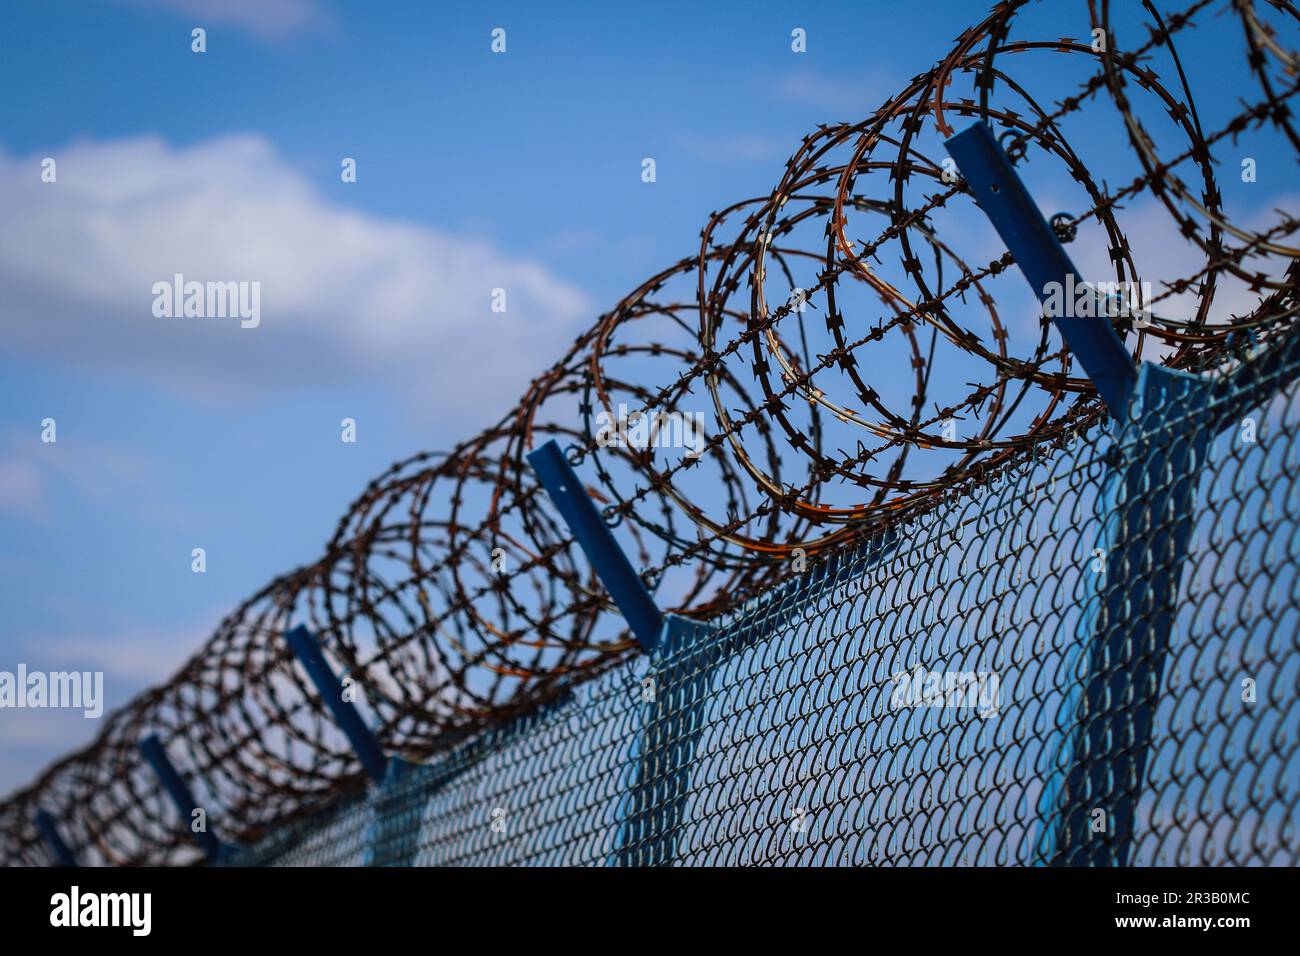 Barbed wire netting fence Stock Photo